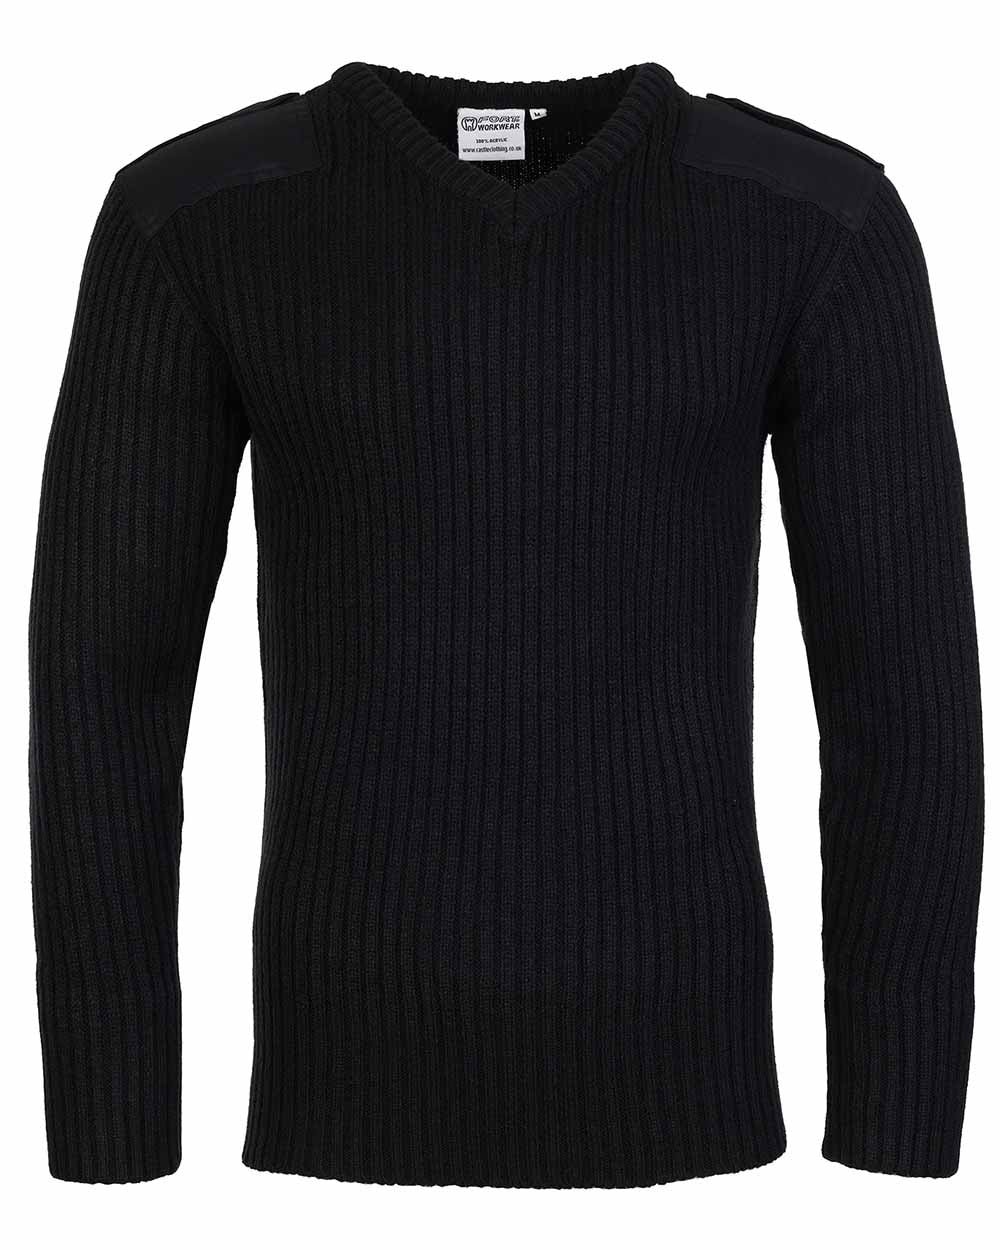 Vee Neck Military Style Jumper by Fort 